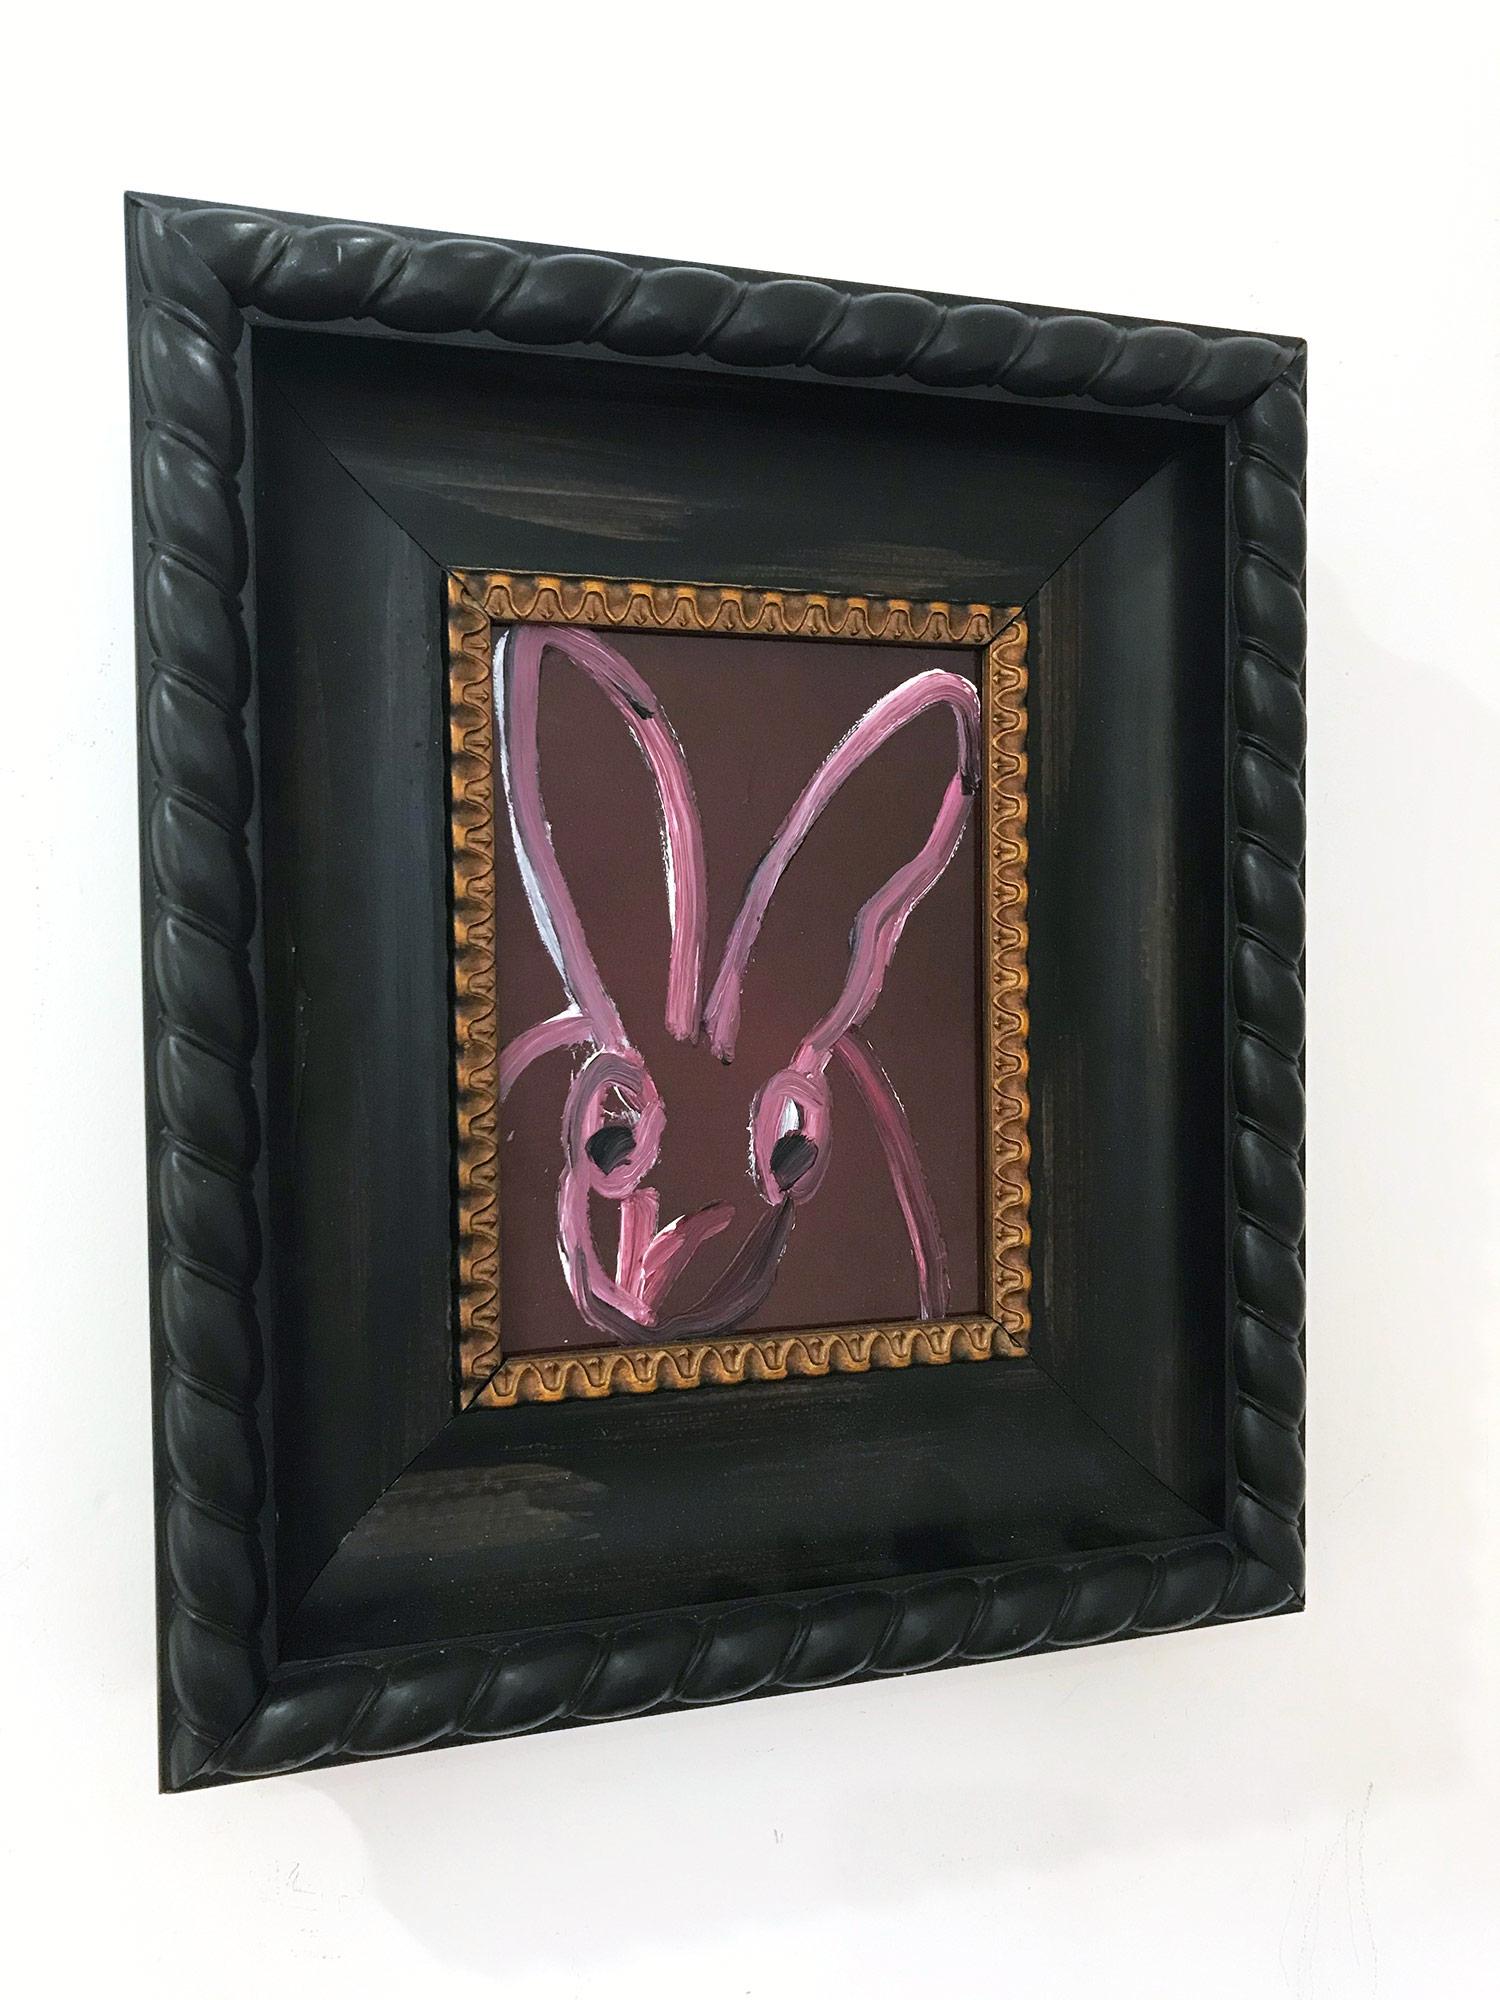 A wonderful composition of one of Slonem's most iconic subjects, Bunnies. This piece depicts a gestural figure of a black bunny on a Purple resin background with thick use of paint. It is housed in a wonderful Gothic Style frame. Inspired by nature